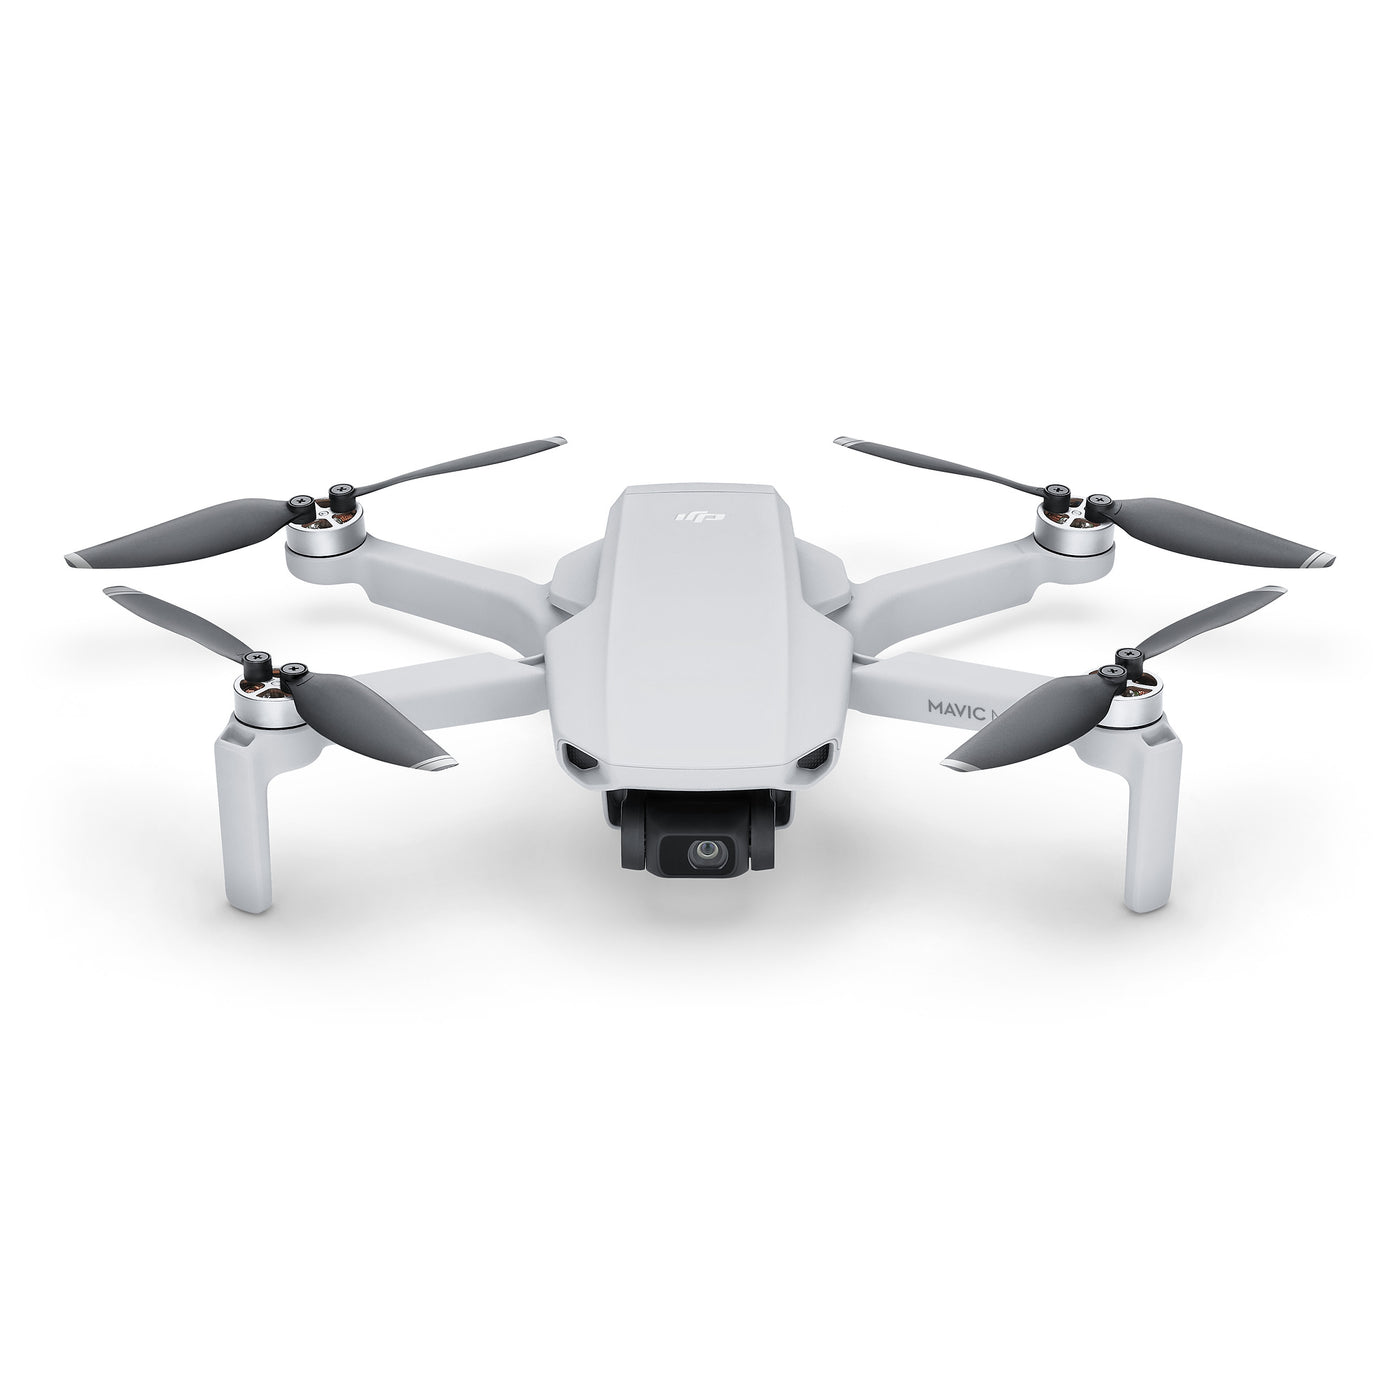 I was a Drone Virgin, But the New DJI Mini 2 Has Me Hooked